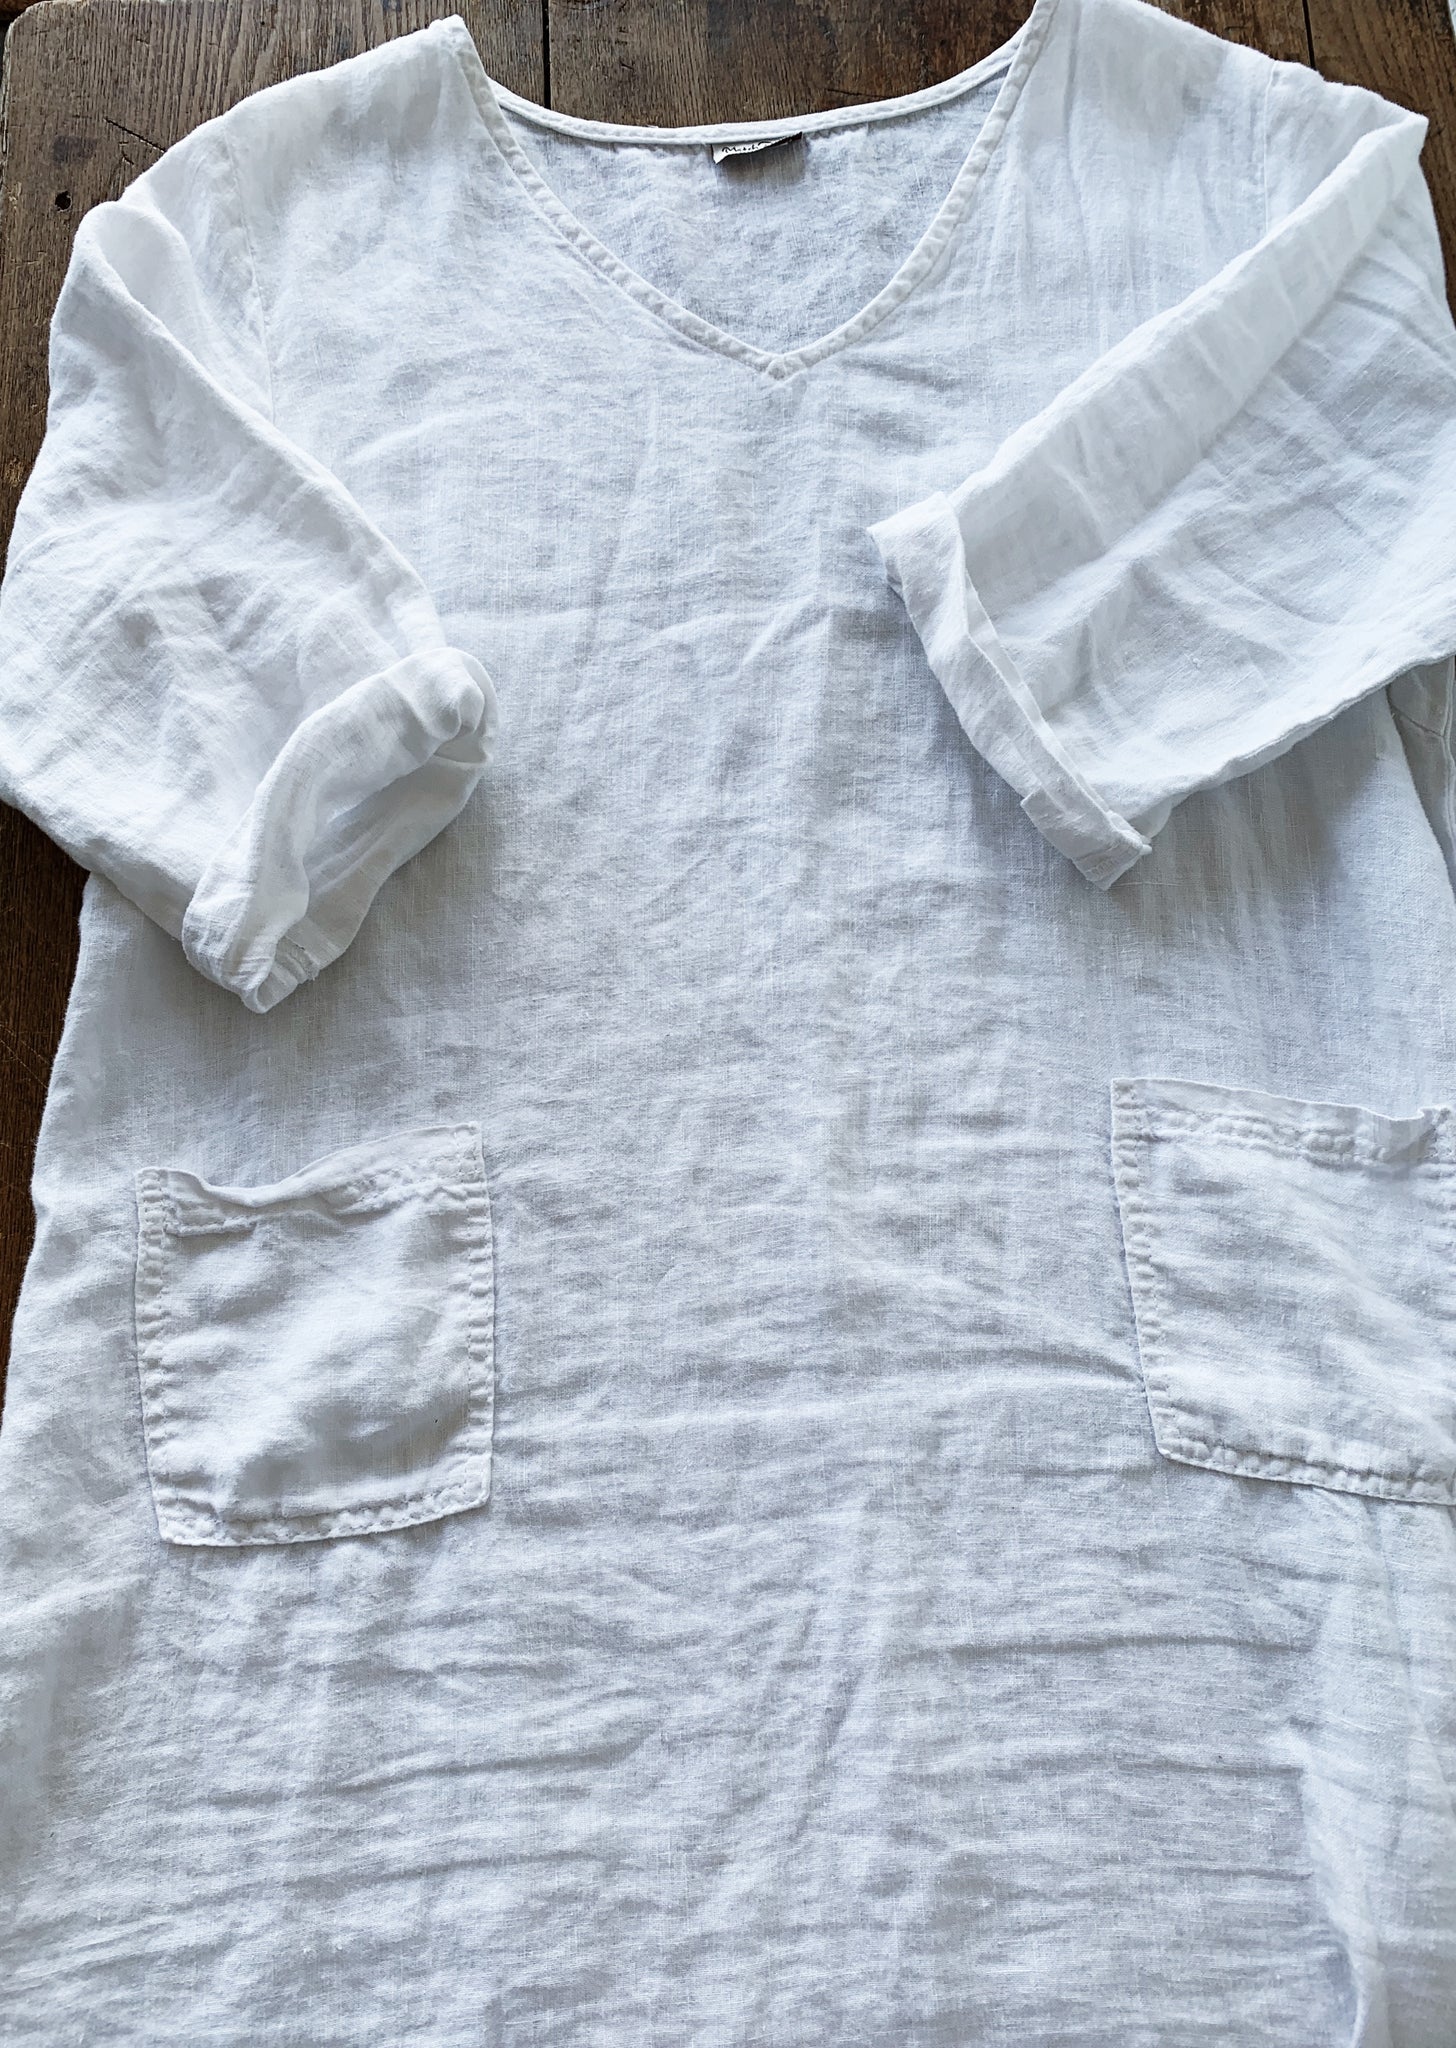 Match Point White Linen Shift Dress with Pockets